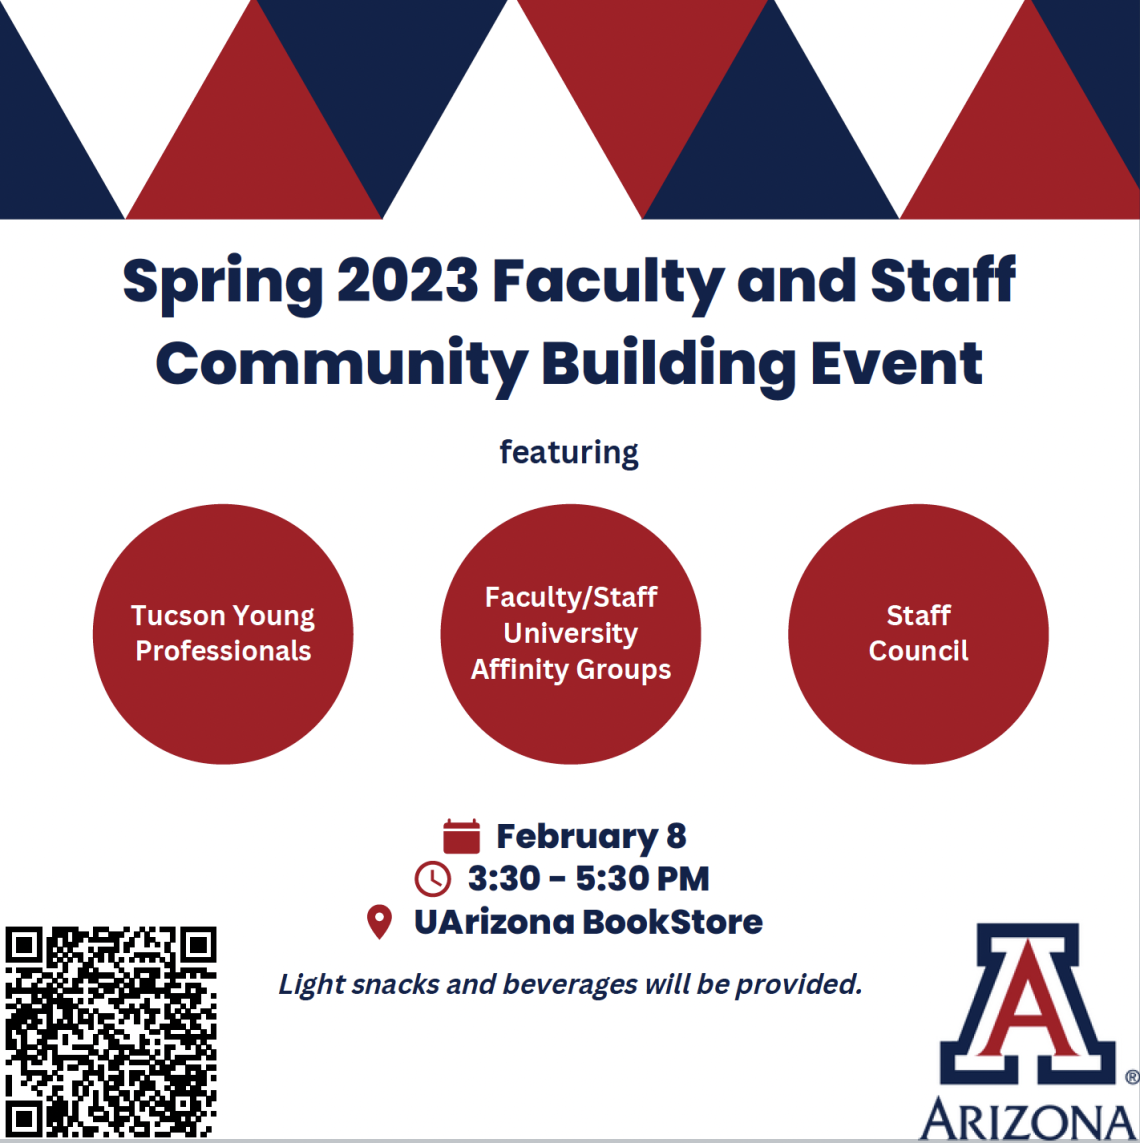 Spring 2023 Faculty and Staff Community Building Event